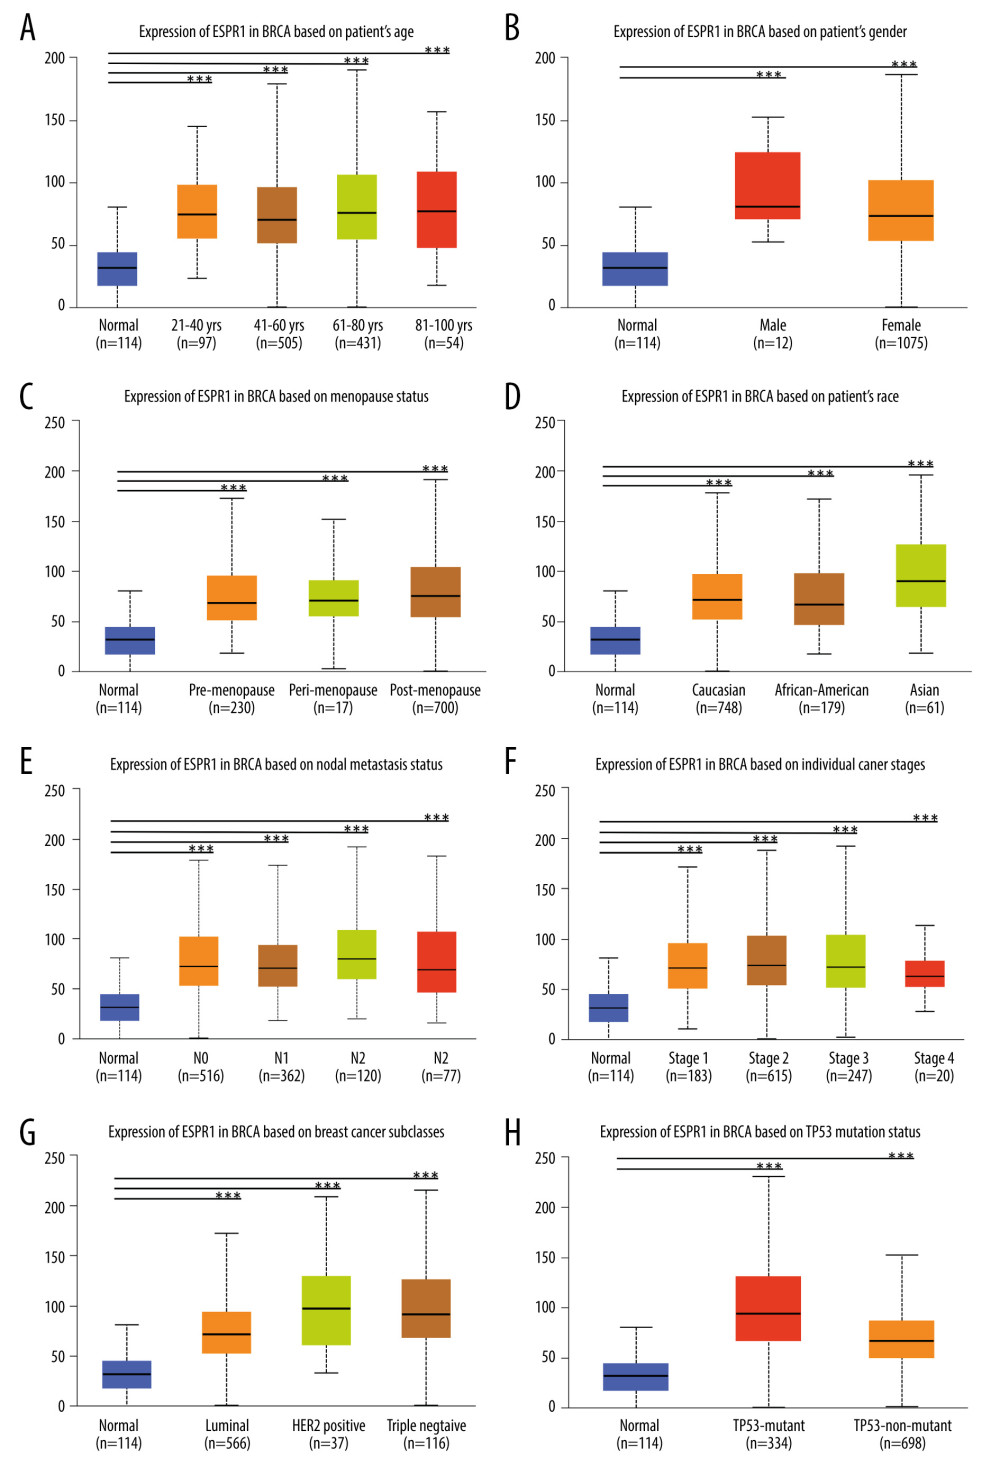 Association of ESRP1 expression with clinicopathological characteristics in breast cancer. University of Alabama Cancer (UALCAN) analysis showed the mRNA level of ESRP1 in breast cancer patients with distinct clinicopathological characteristics included (A) age, (B) sex, (C) menopause status, (D) race, (E) nodal metastasis status, (F) individual cancer stages, (G) subtypes, and (H) TP53 mutation status. * P<0.05, ** P<0.01, *** P<0.001.